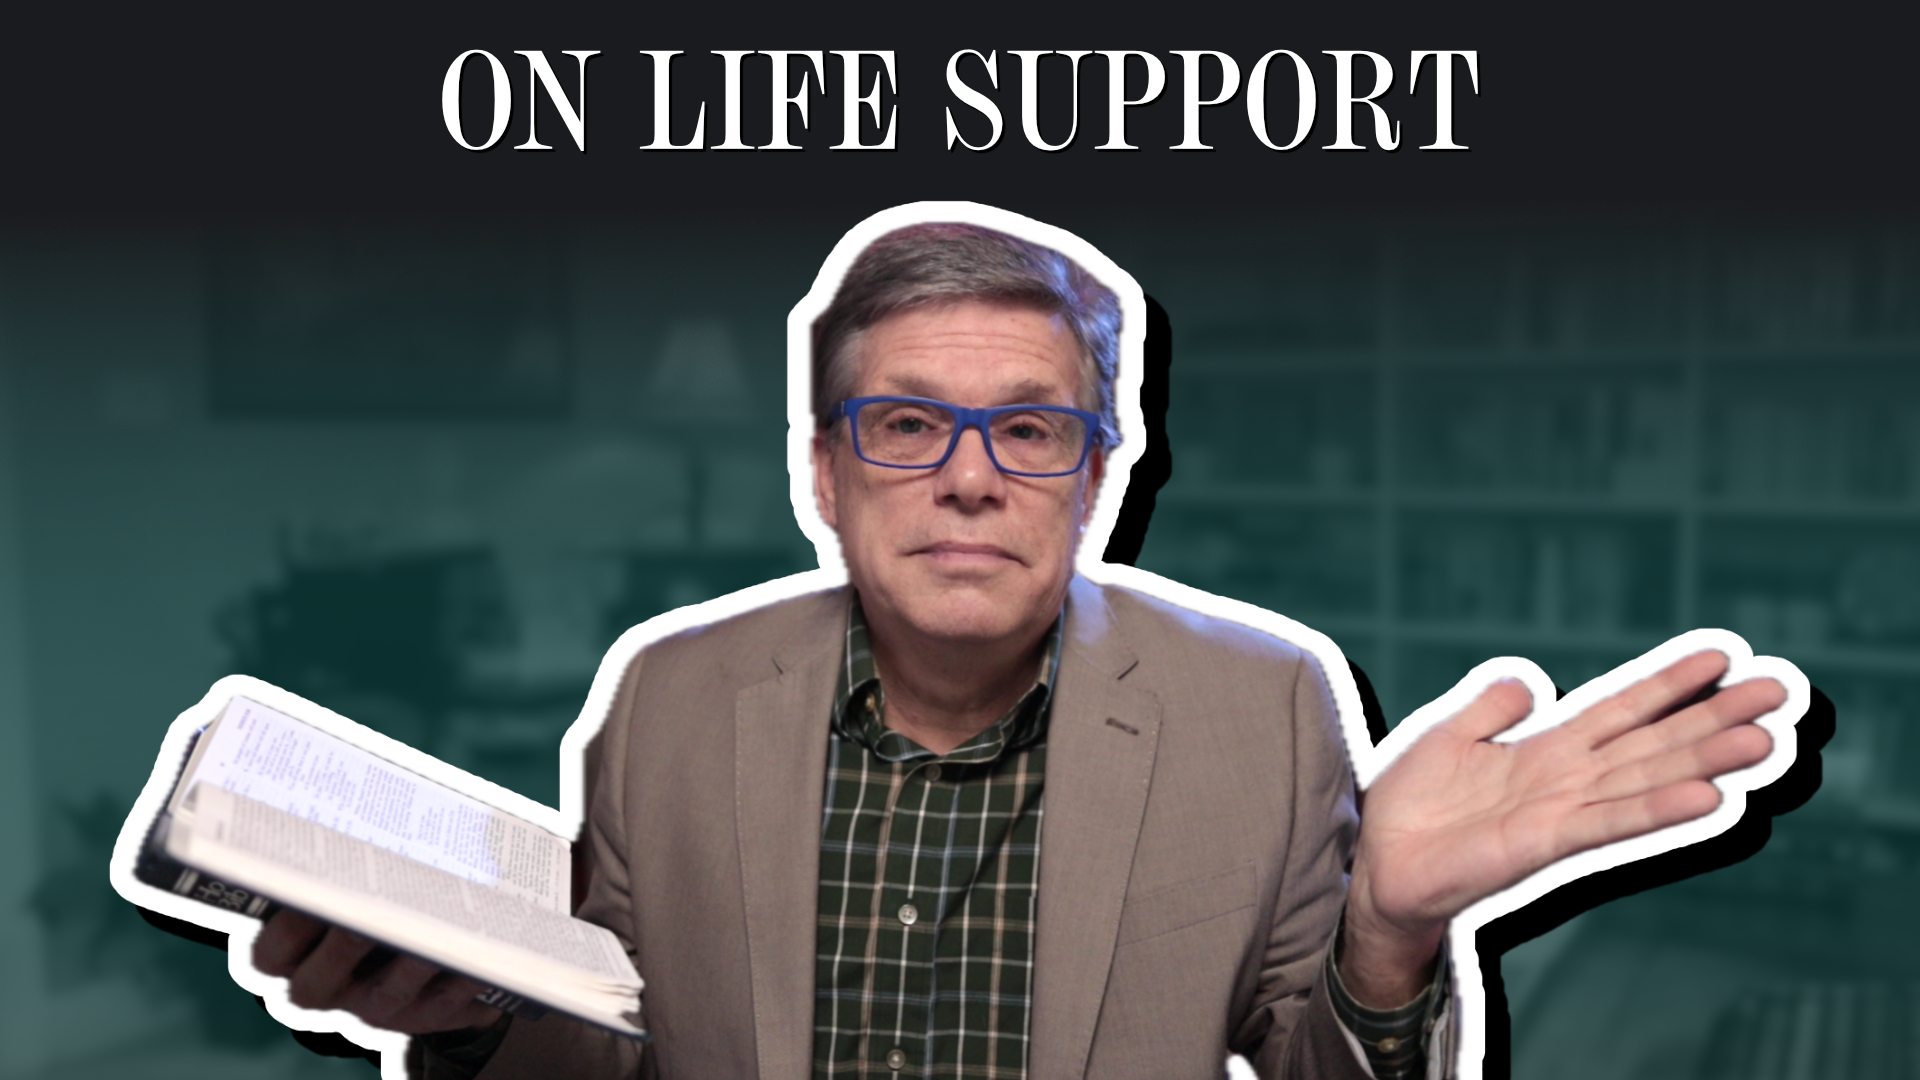 Pro-Abortion Theology on Life Support